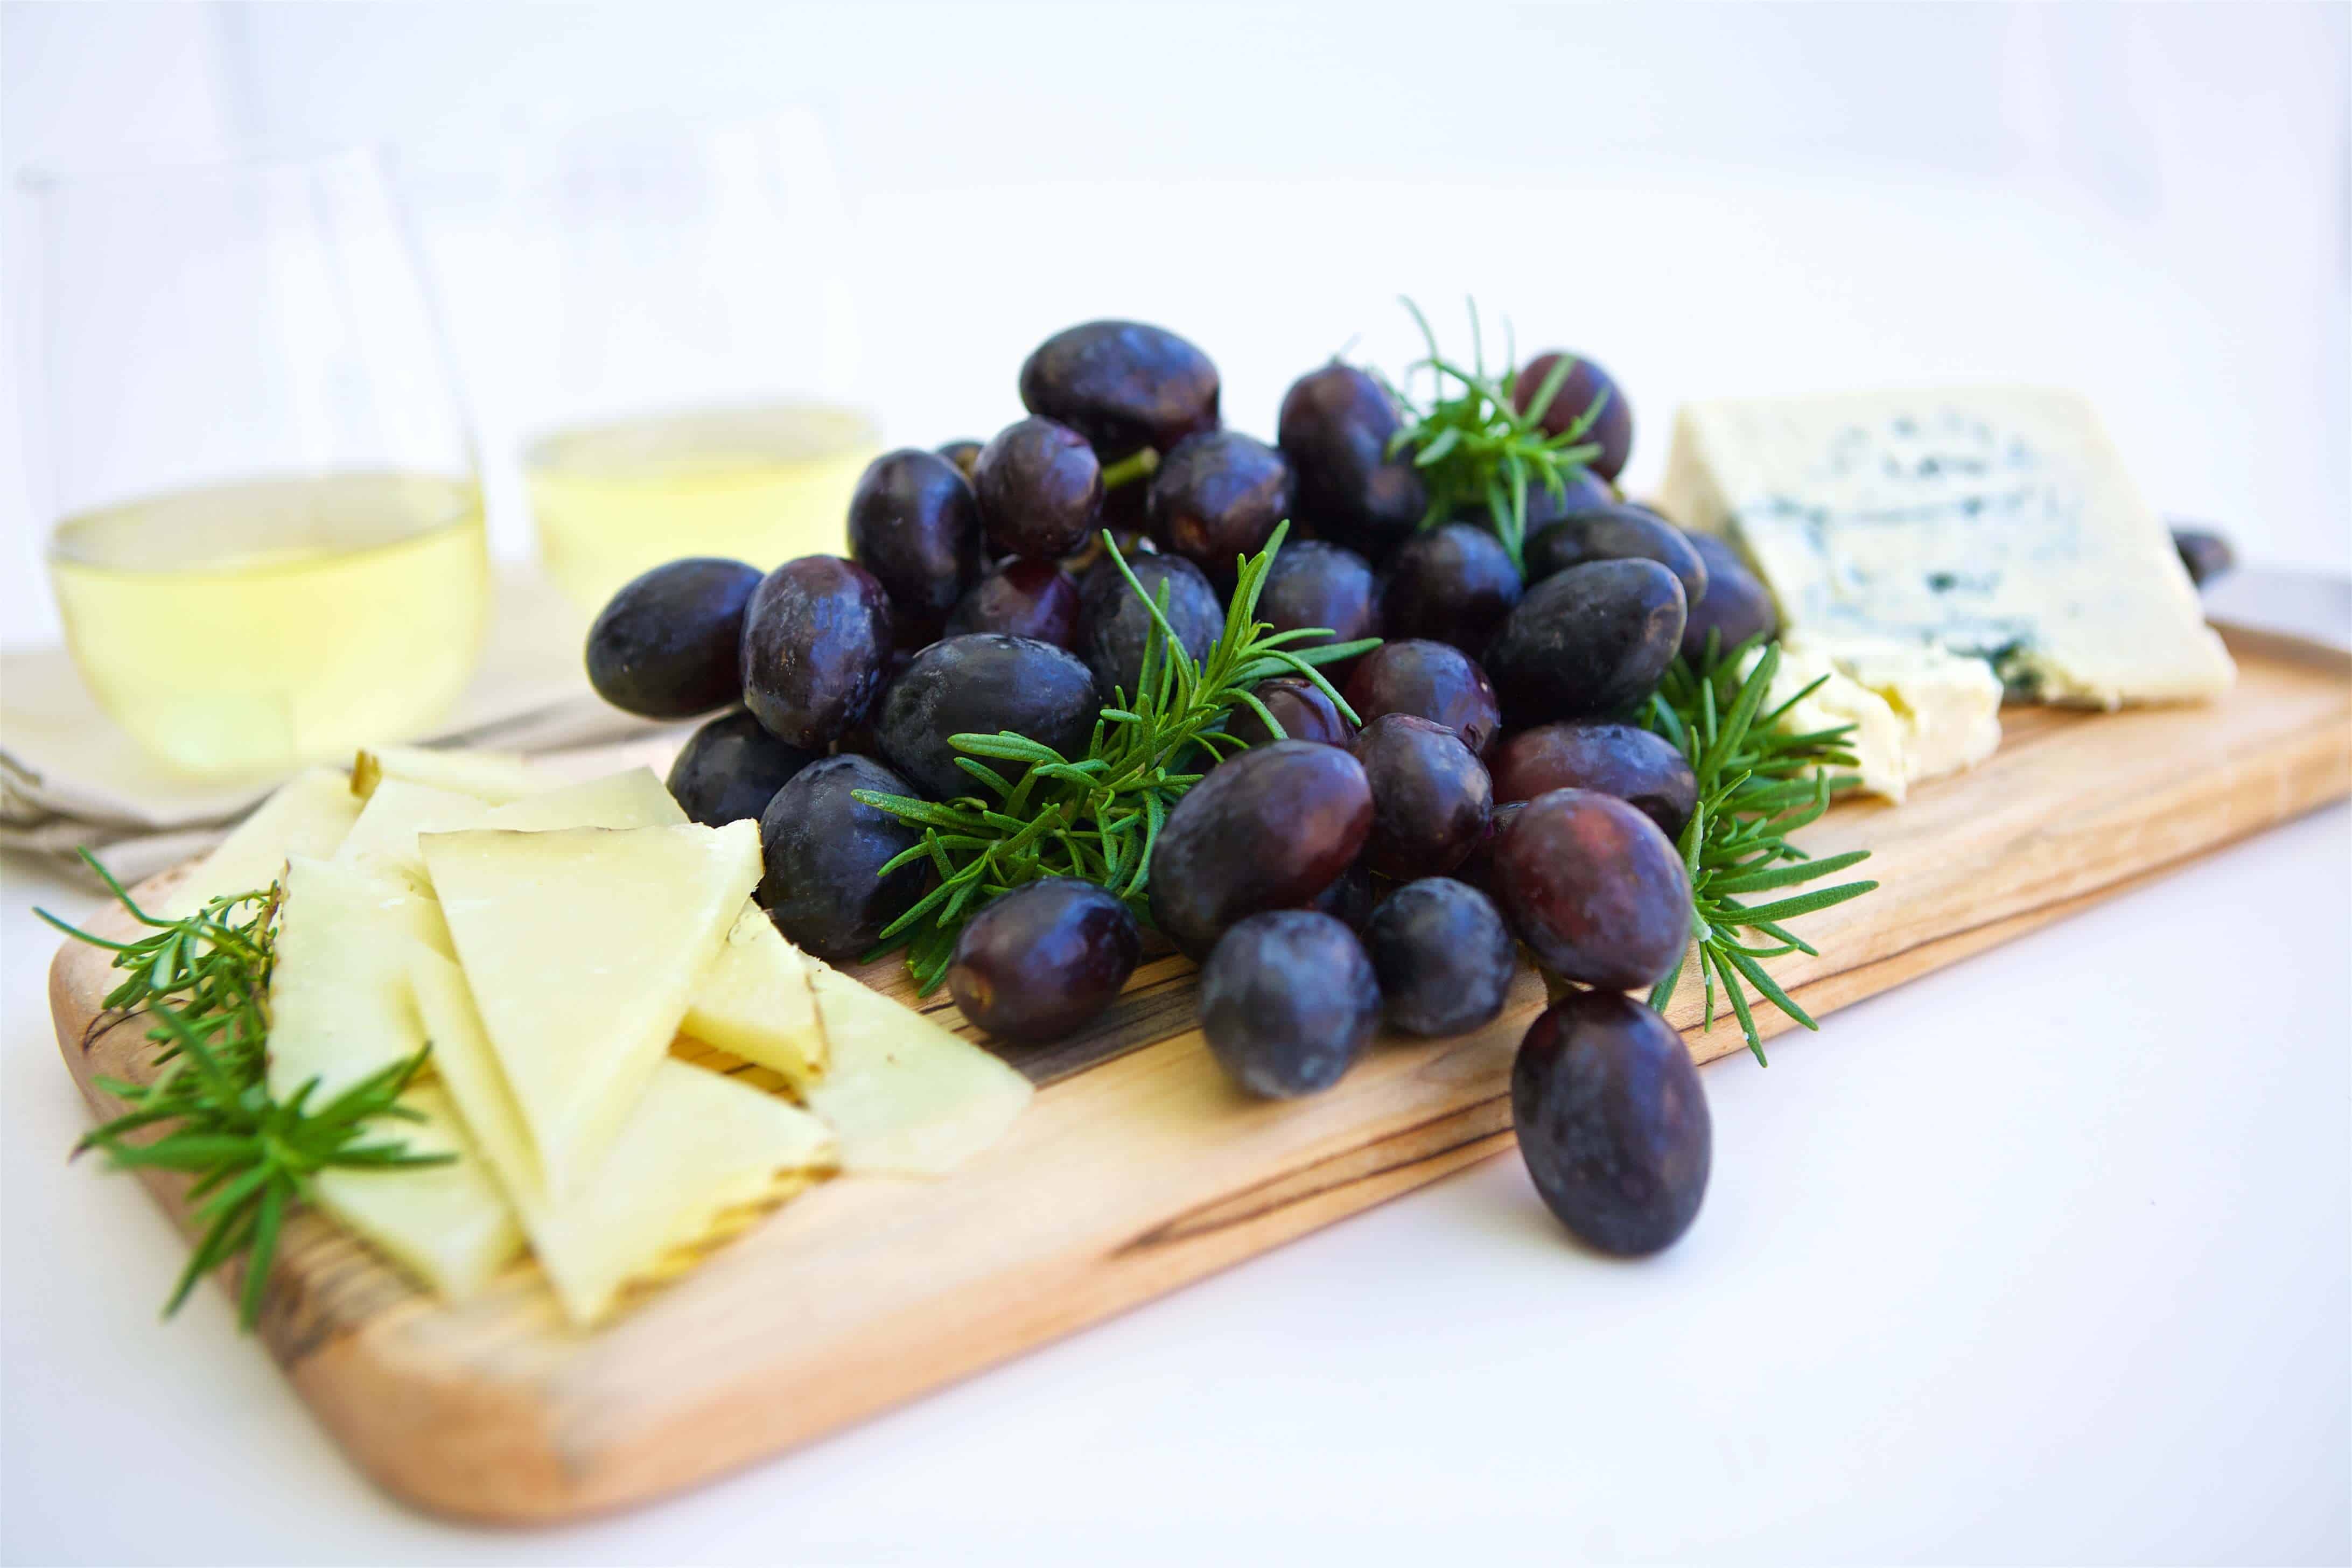 Grapes and cheese are the perfect appetizer for any occasion, no matter the time of year. Here are three cheese platter ideas to meet any need or level of sophistication.